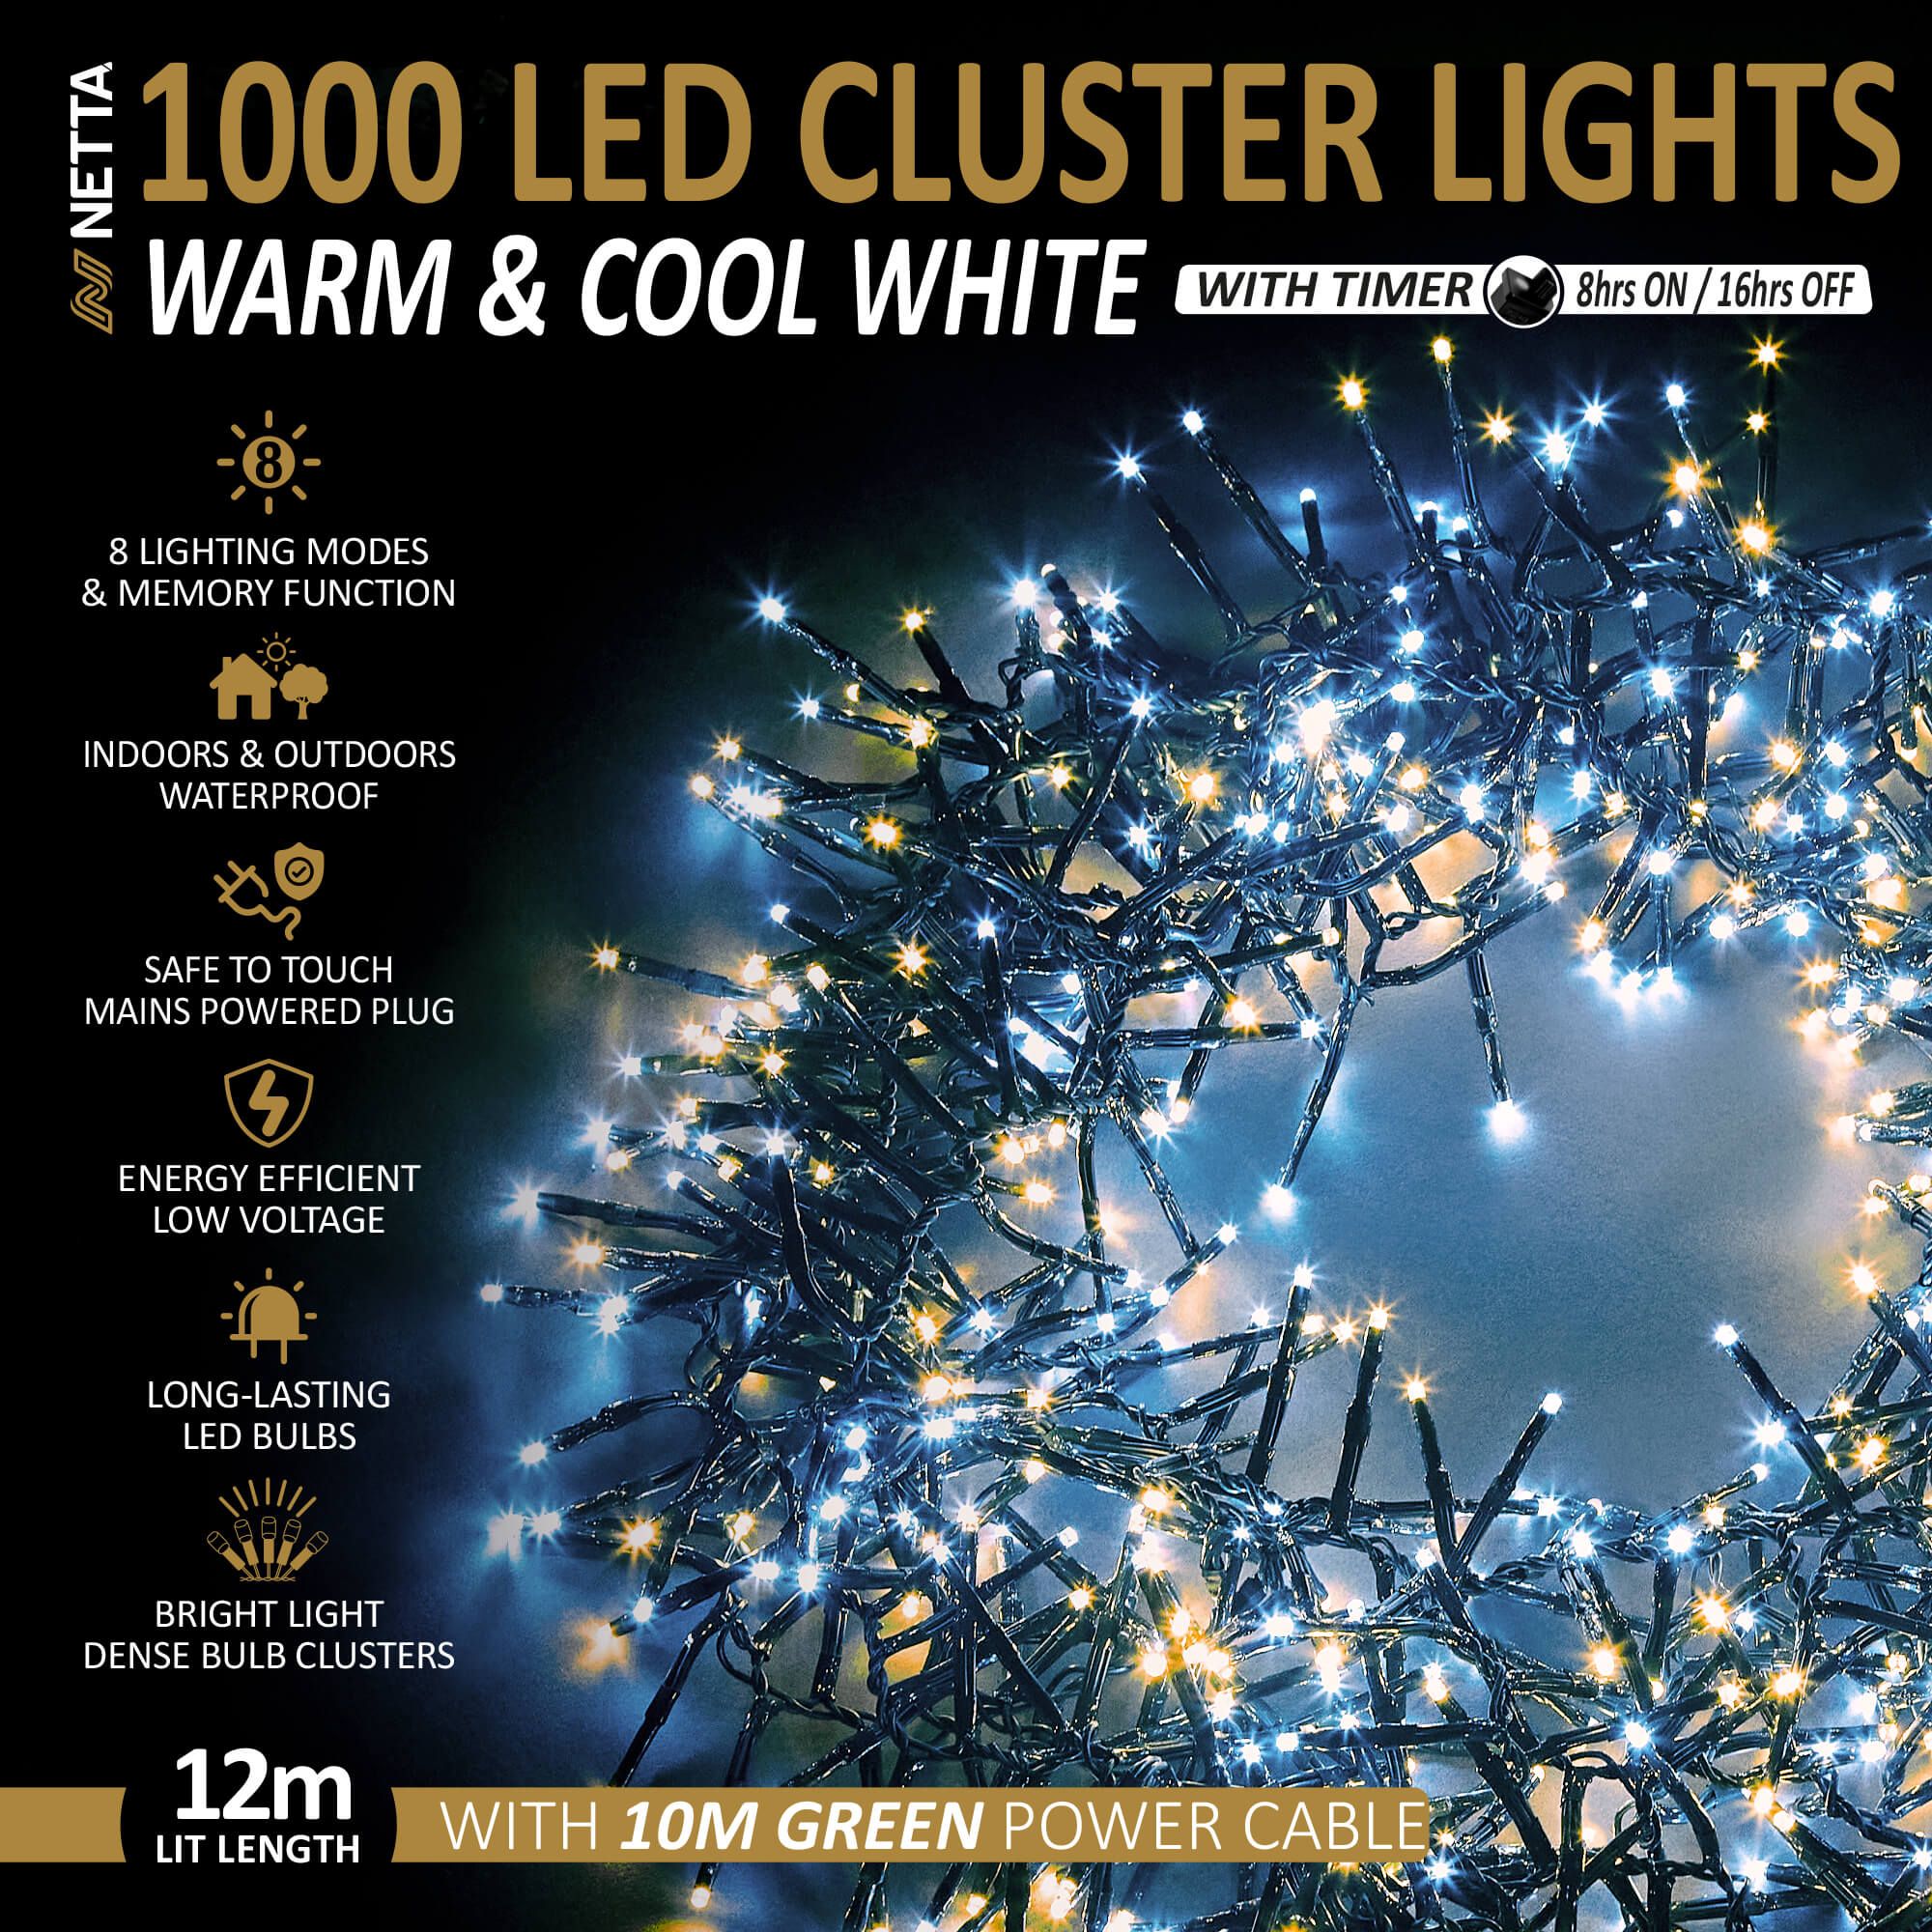 1000 LED 12M Cluster String Lights Outdoor and Indoor Plug In - Warm & Cool White